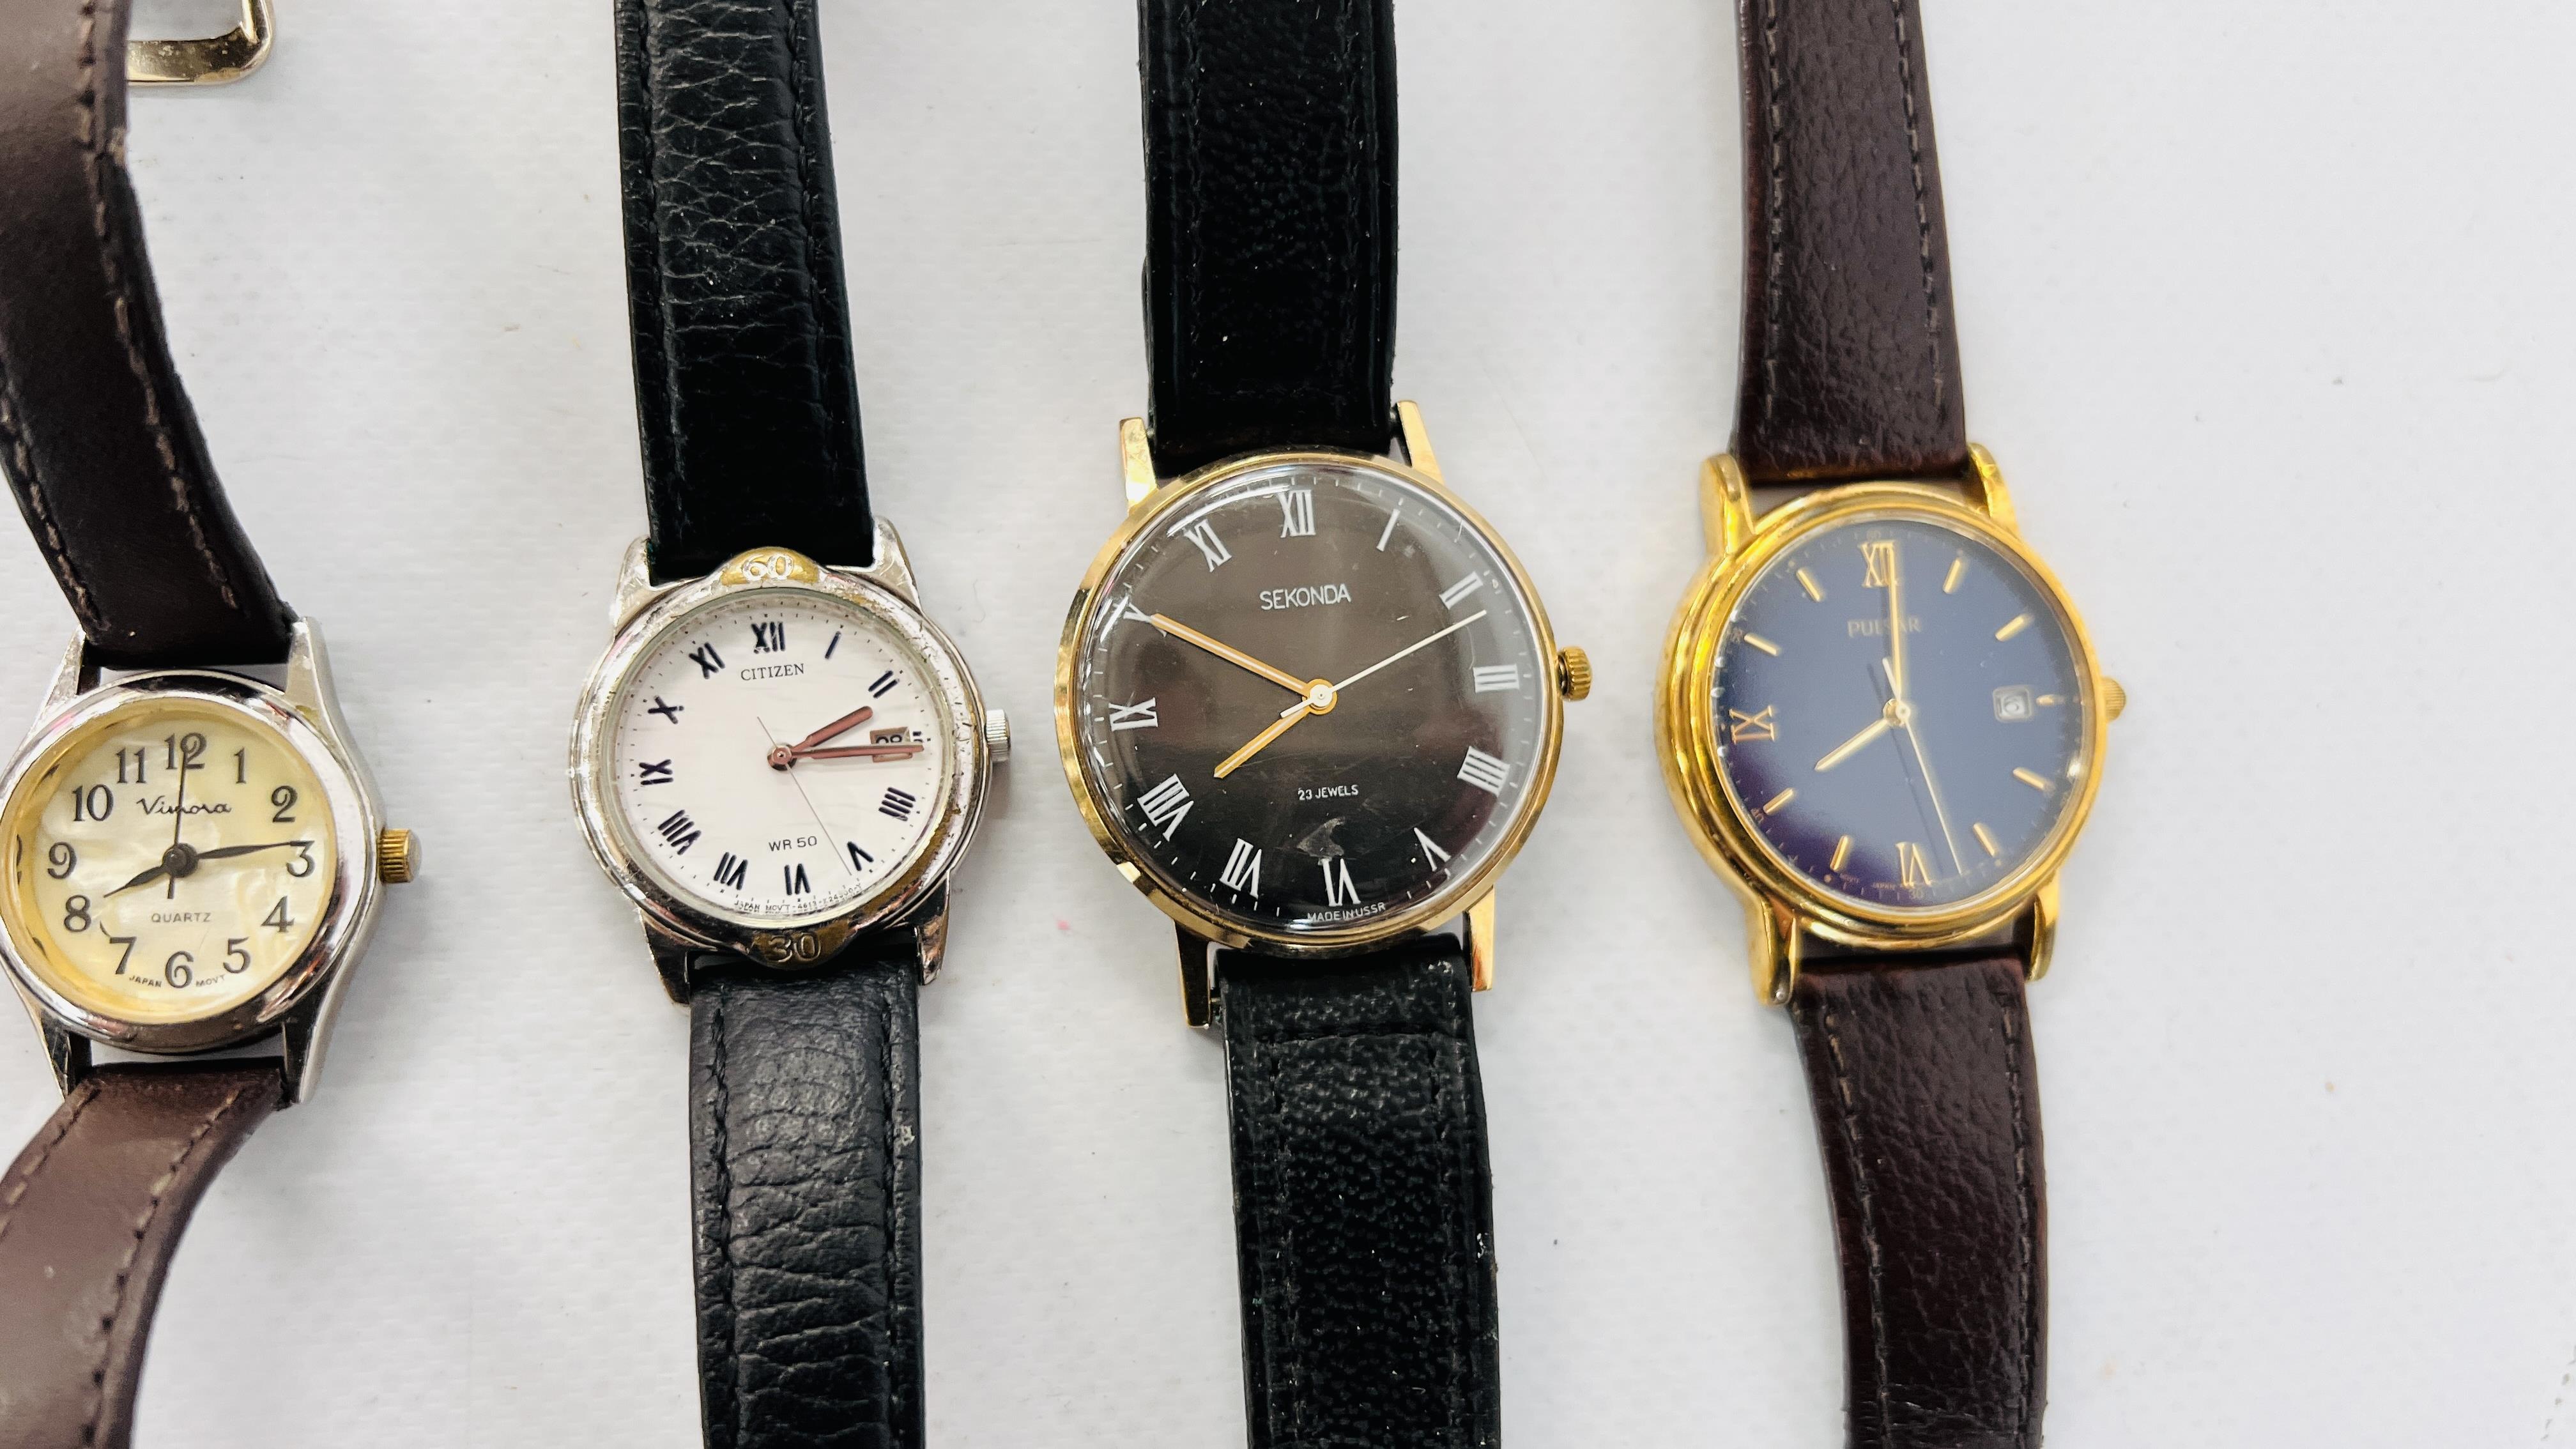 A GROUP OF 9 ASSORTED WRIST WATCHES TO INCLUDE EXAMPLES MARKED PULSAR, SEKONDA, RAVEL ETC. - Image 4 of 4